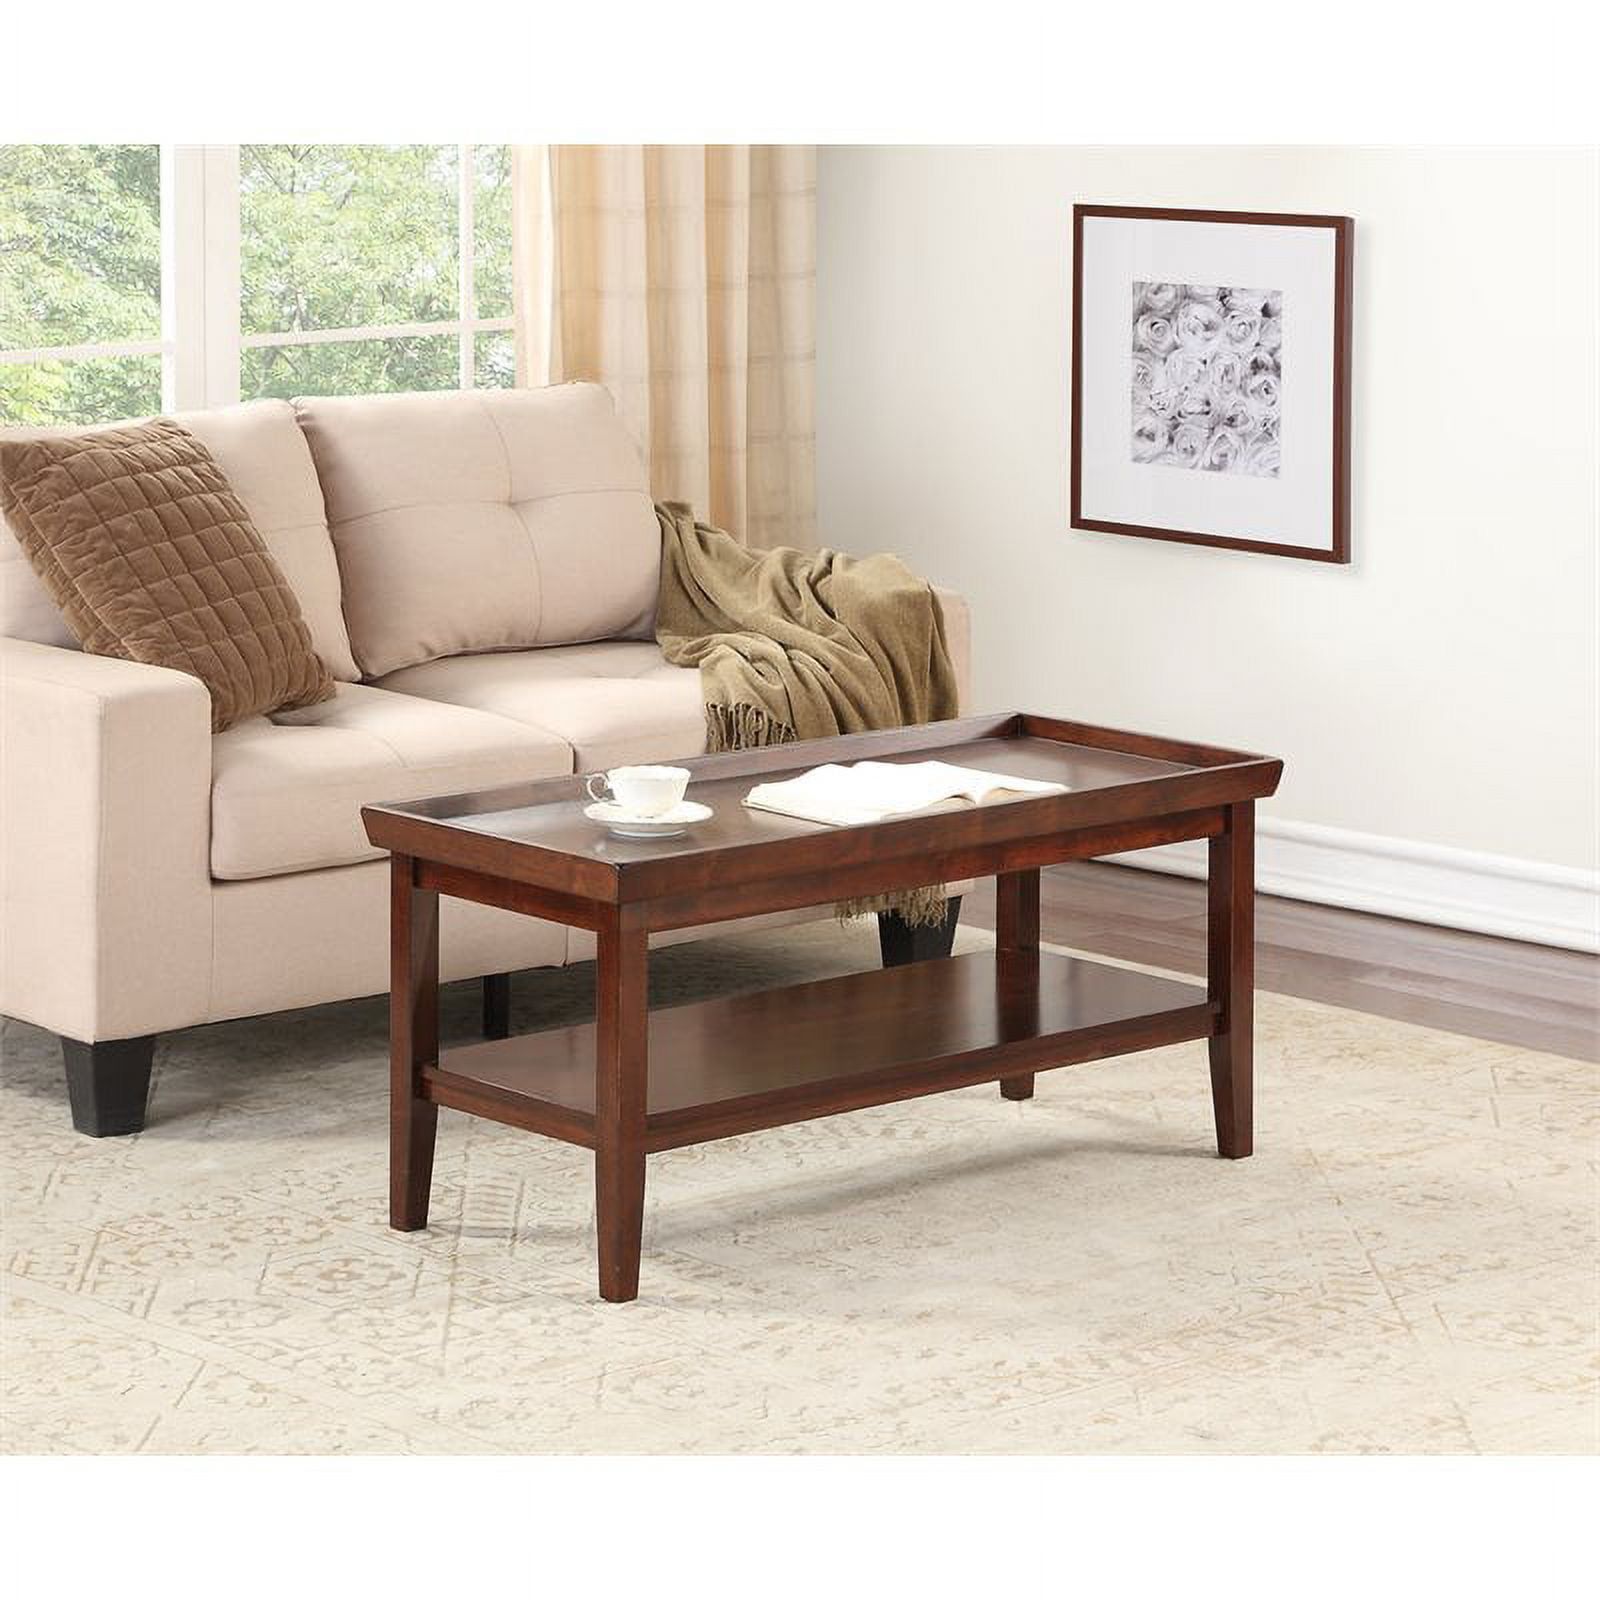 Pemberly Row Coffee Table In Espresso Wood Finish – Walmart Inside Espresso Wood Finish Coffee Tables (Photo 11 of 15)